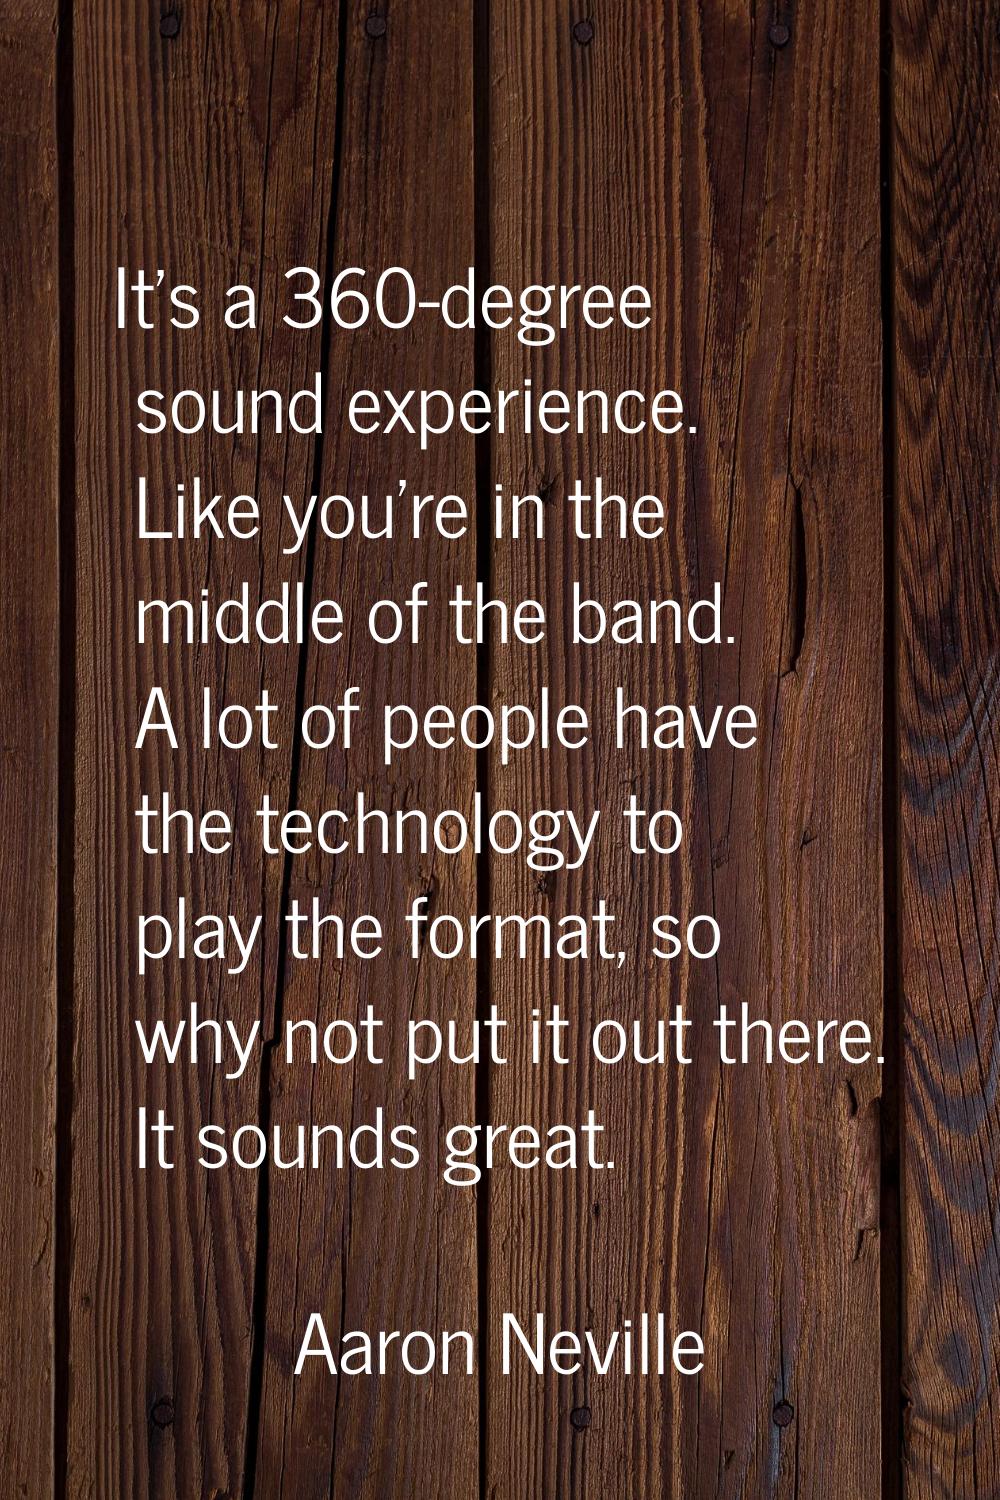 It's a 360-degree sound experience. Like you're in the middle of the band. A lot of people have the